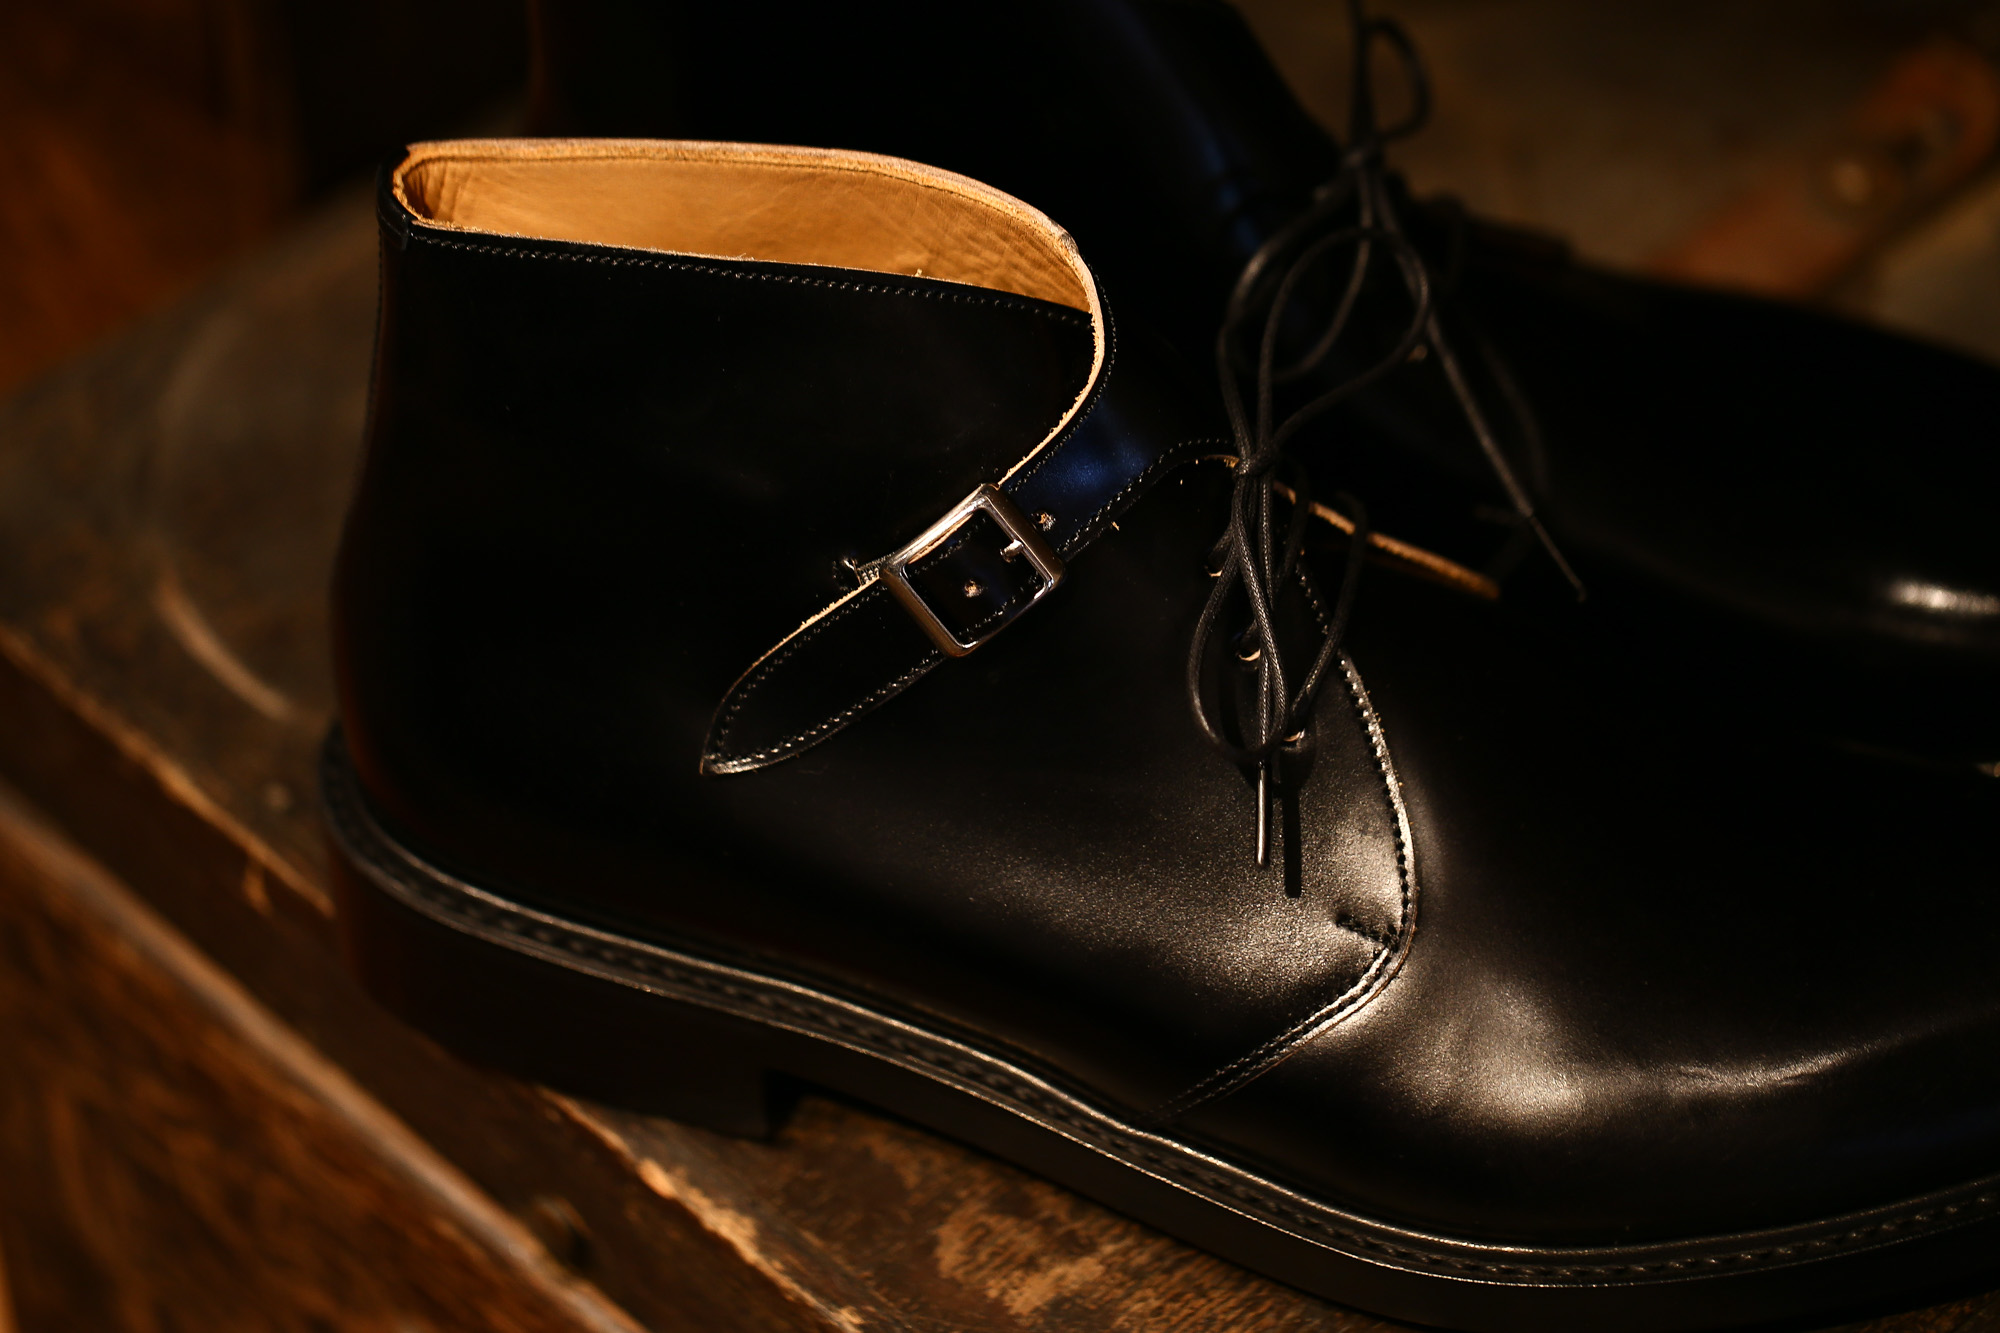 Cuervo (クエルボ)  【2017 AW NEW MODEL】【Derringer / デリンジャー】 CORDOVAN Goodyear Welt Process Double Leather Sole  Chukkaboots BLACK MADE IN JAPAN 【Special Model 1st sample】 cuervoクエルボ チャッカブーツ 愛知 名古屋 Alto e Diritto アルト エ デリット 5.5,6,6.5,7,7.5,8,8.5,9,9.5